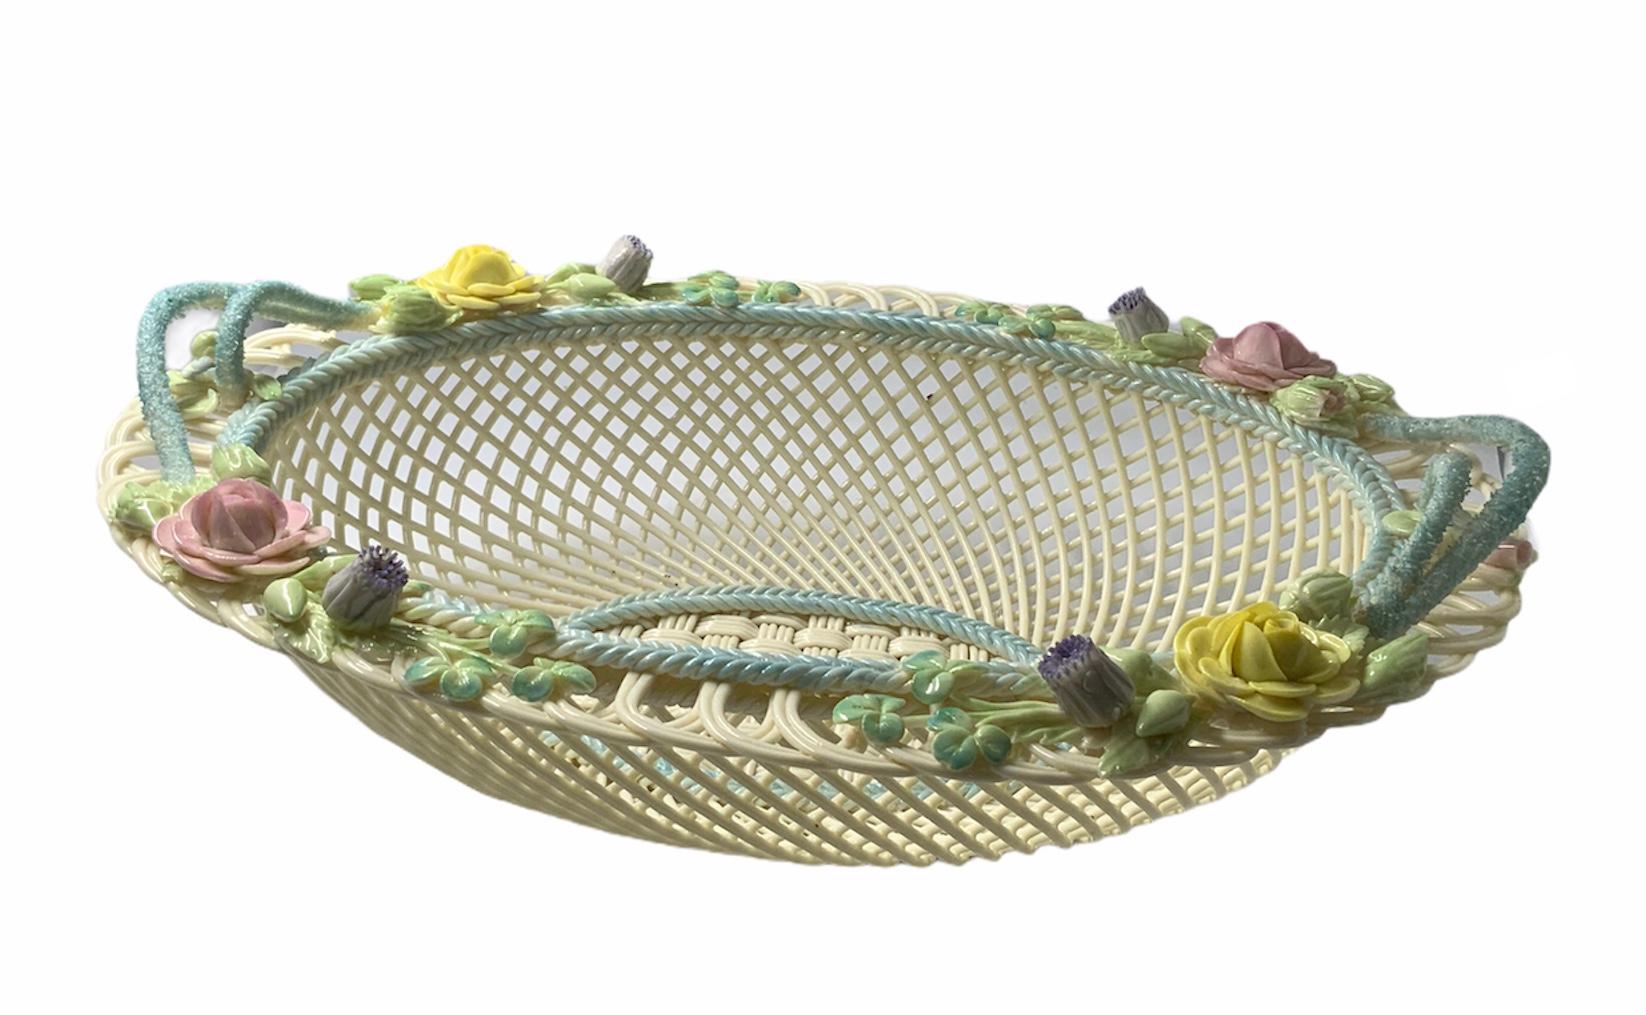 Large delicate oval woven Porcelain basket decorated with a light turquoise braided rim. Alternated large yellow and pink open roses and buds adorn the border together with shamrock branches. Double turquoise ropes Porcelain handles are in each